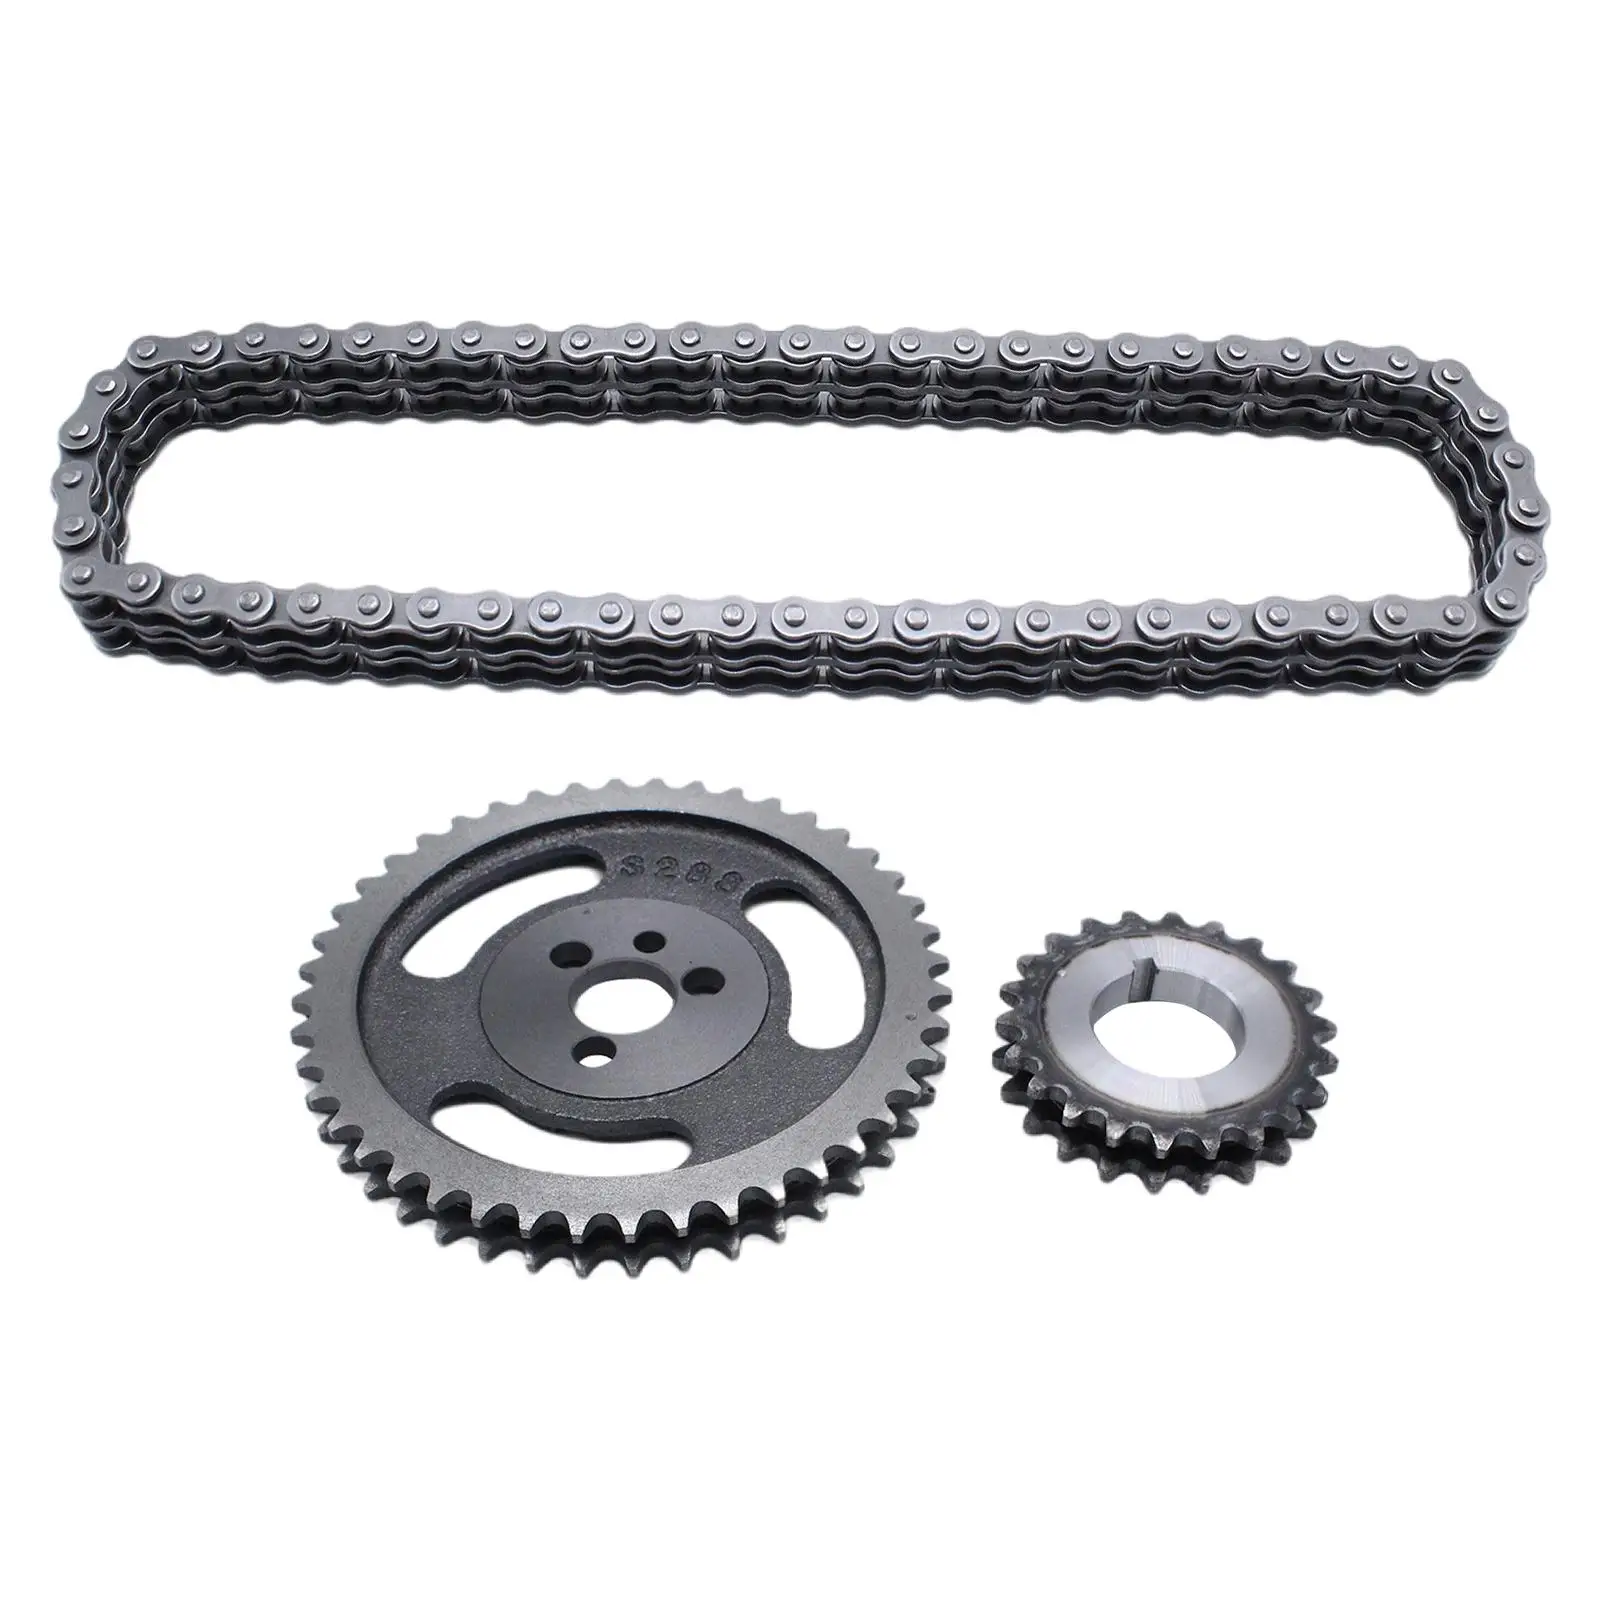 Timing Chain and Gear Set C-3023K C-3023x Side Engine Double Row for Sbc 5.7L 383 350 400 305